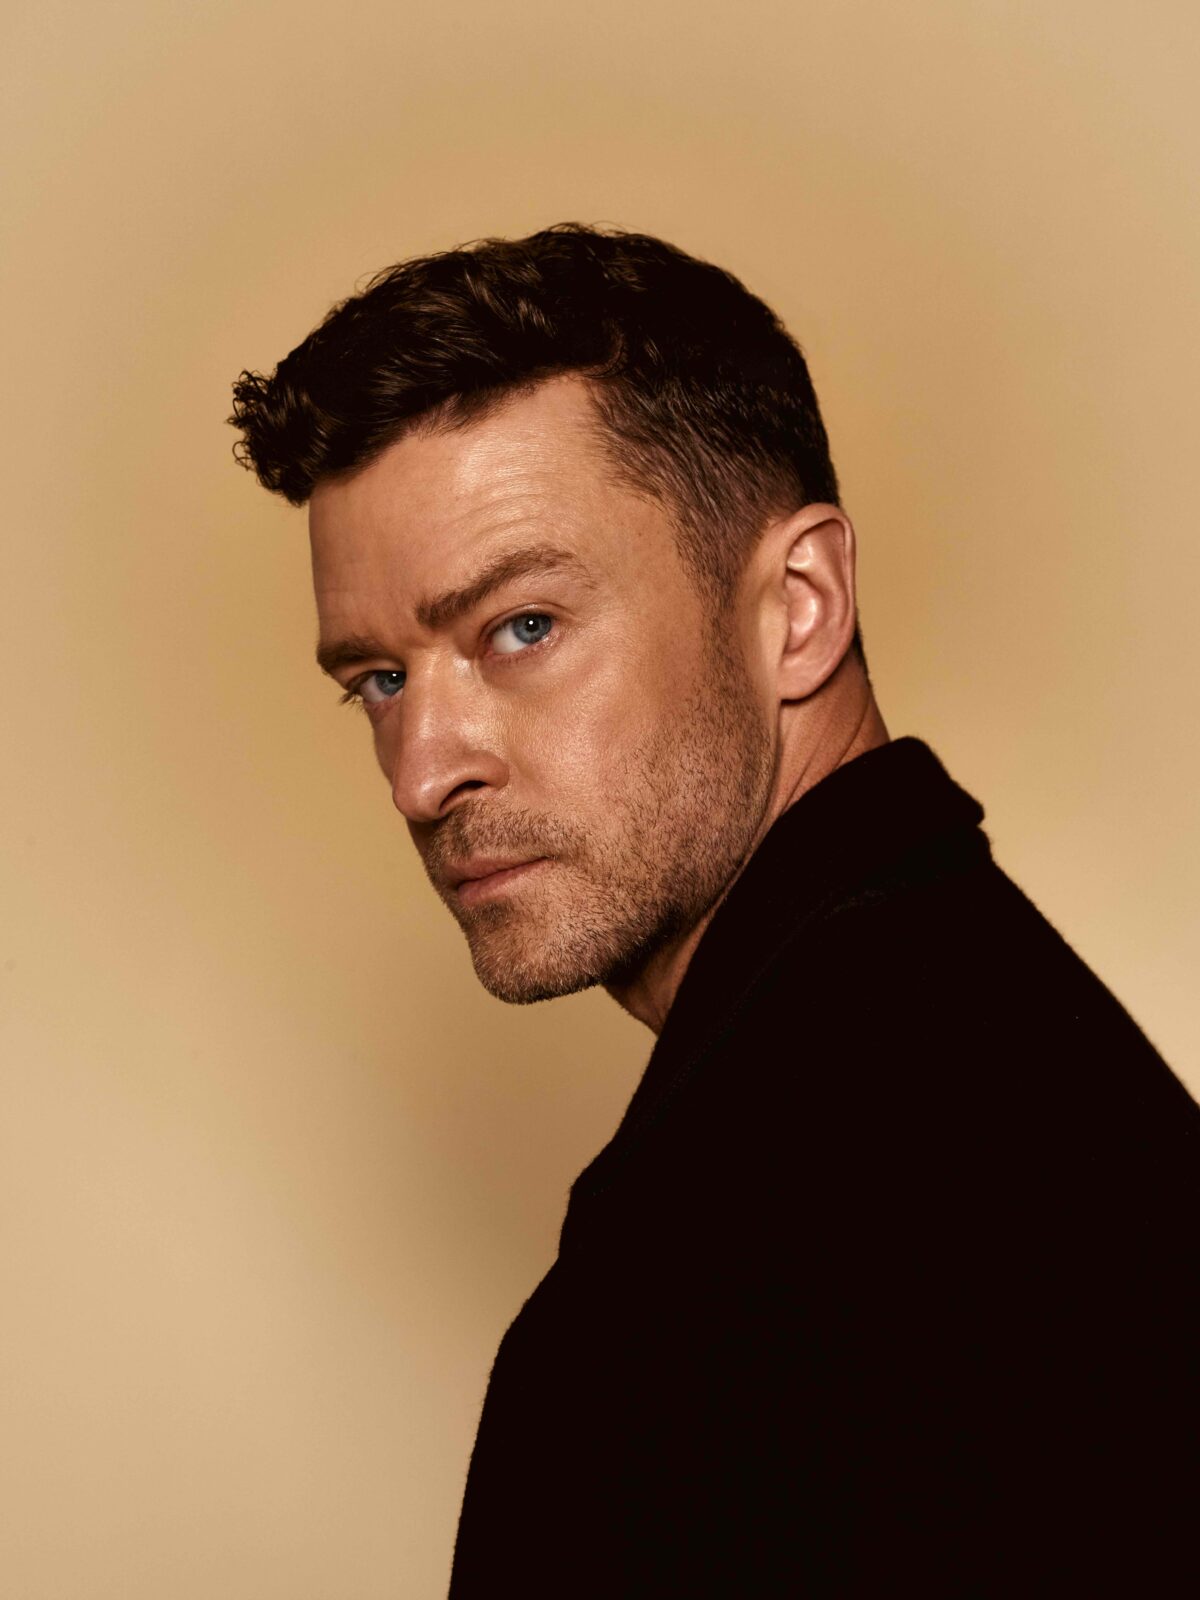 Justin Timberlake has announced the European leg of his tour, including a Manchester show. Credit: Charlotte Rutherford